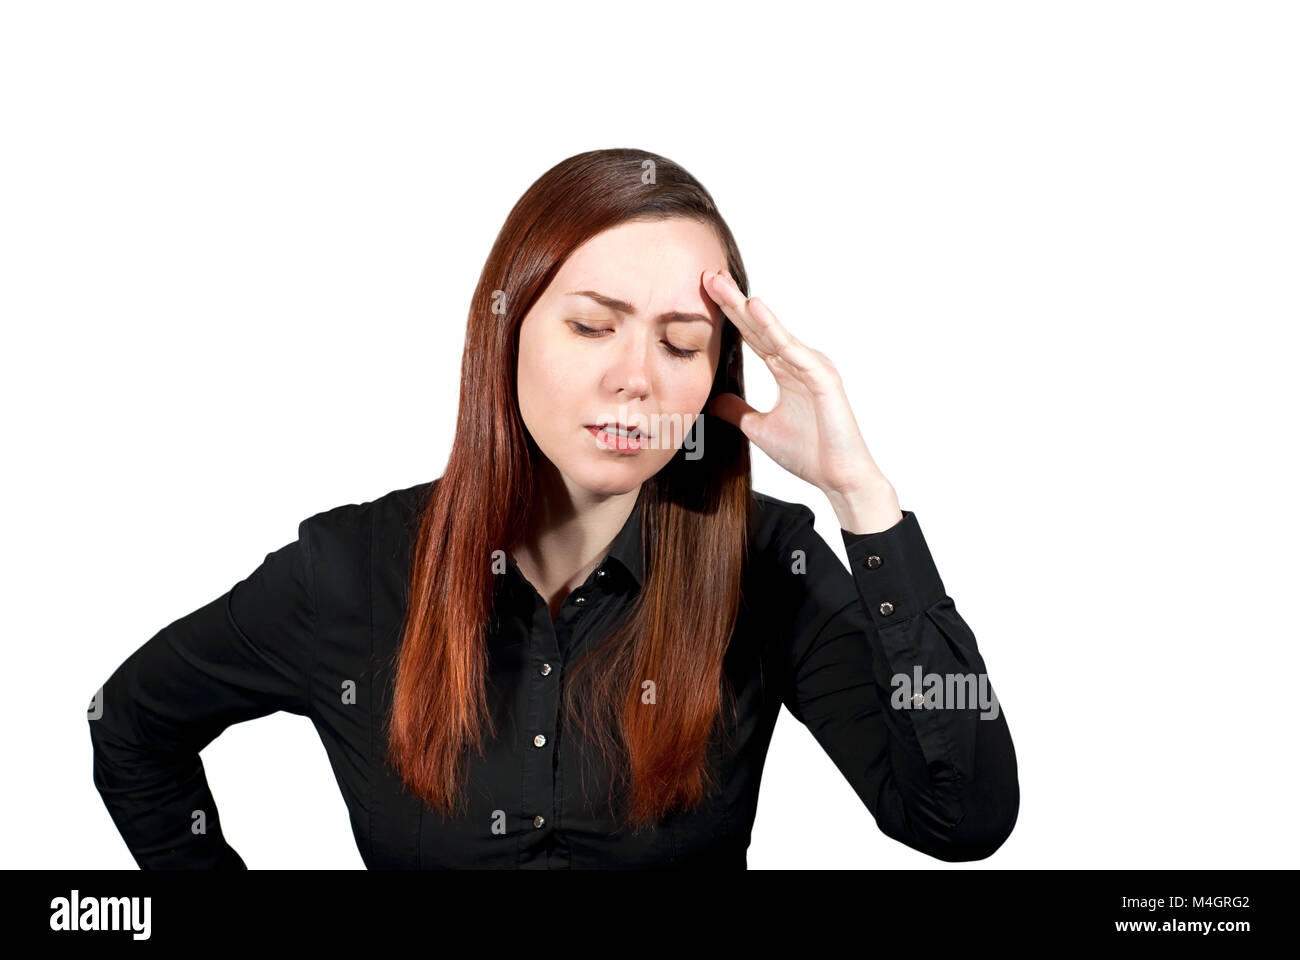 young woman on a white background has put a hand to her forehead and closed her eyes, expressing deep thoughtfulness or suffering from a headache Stock Photo